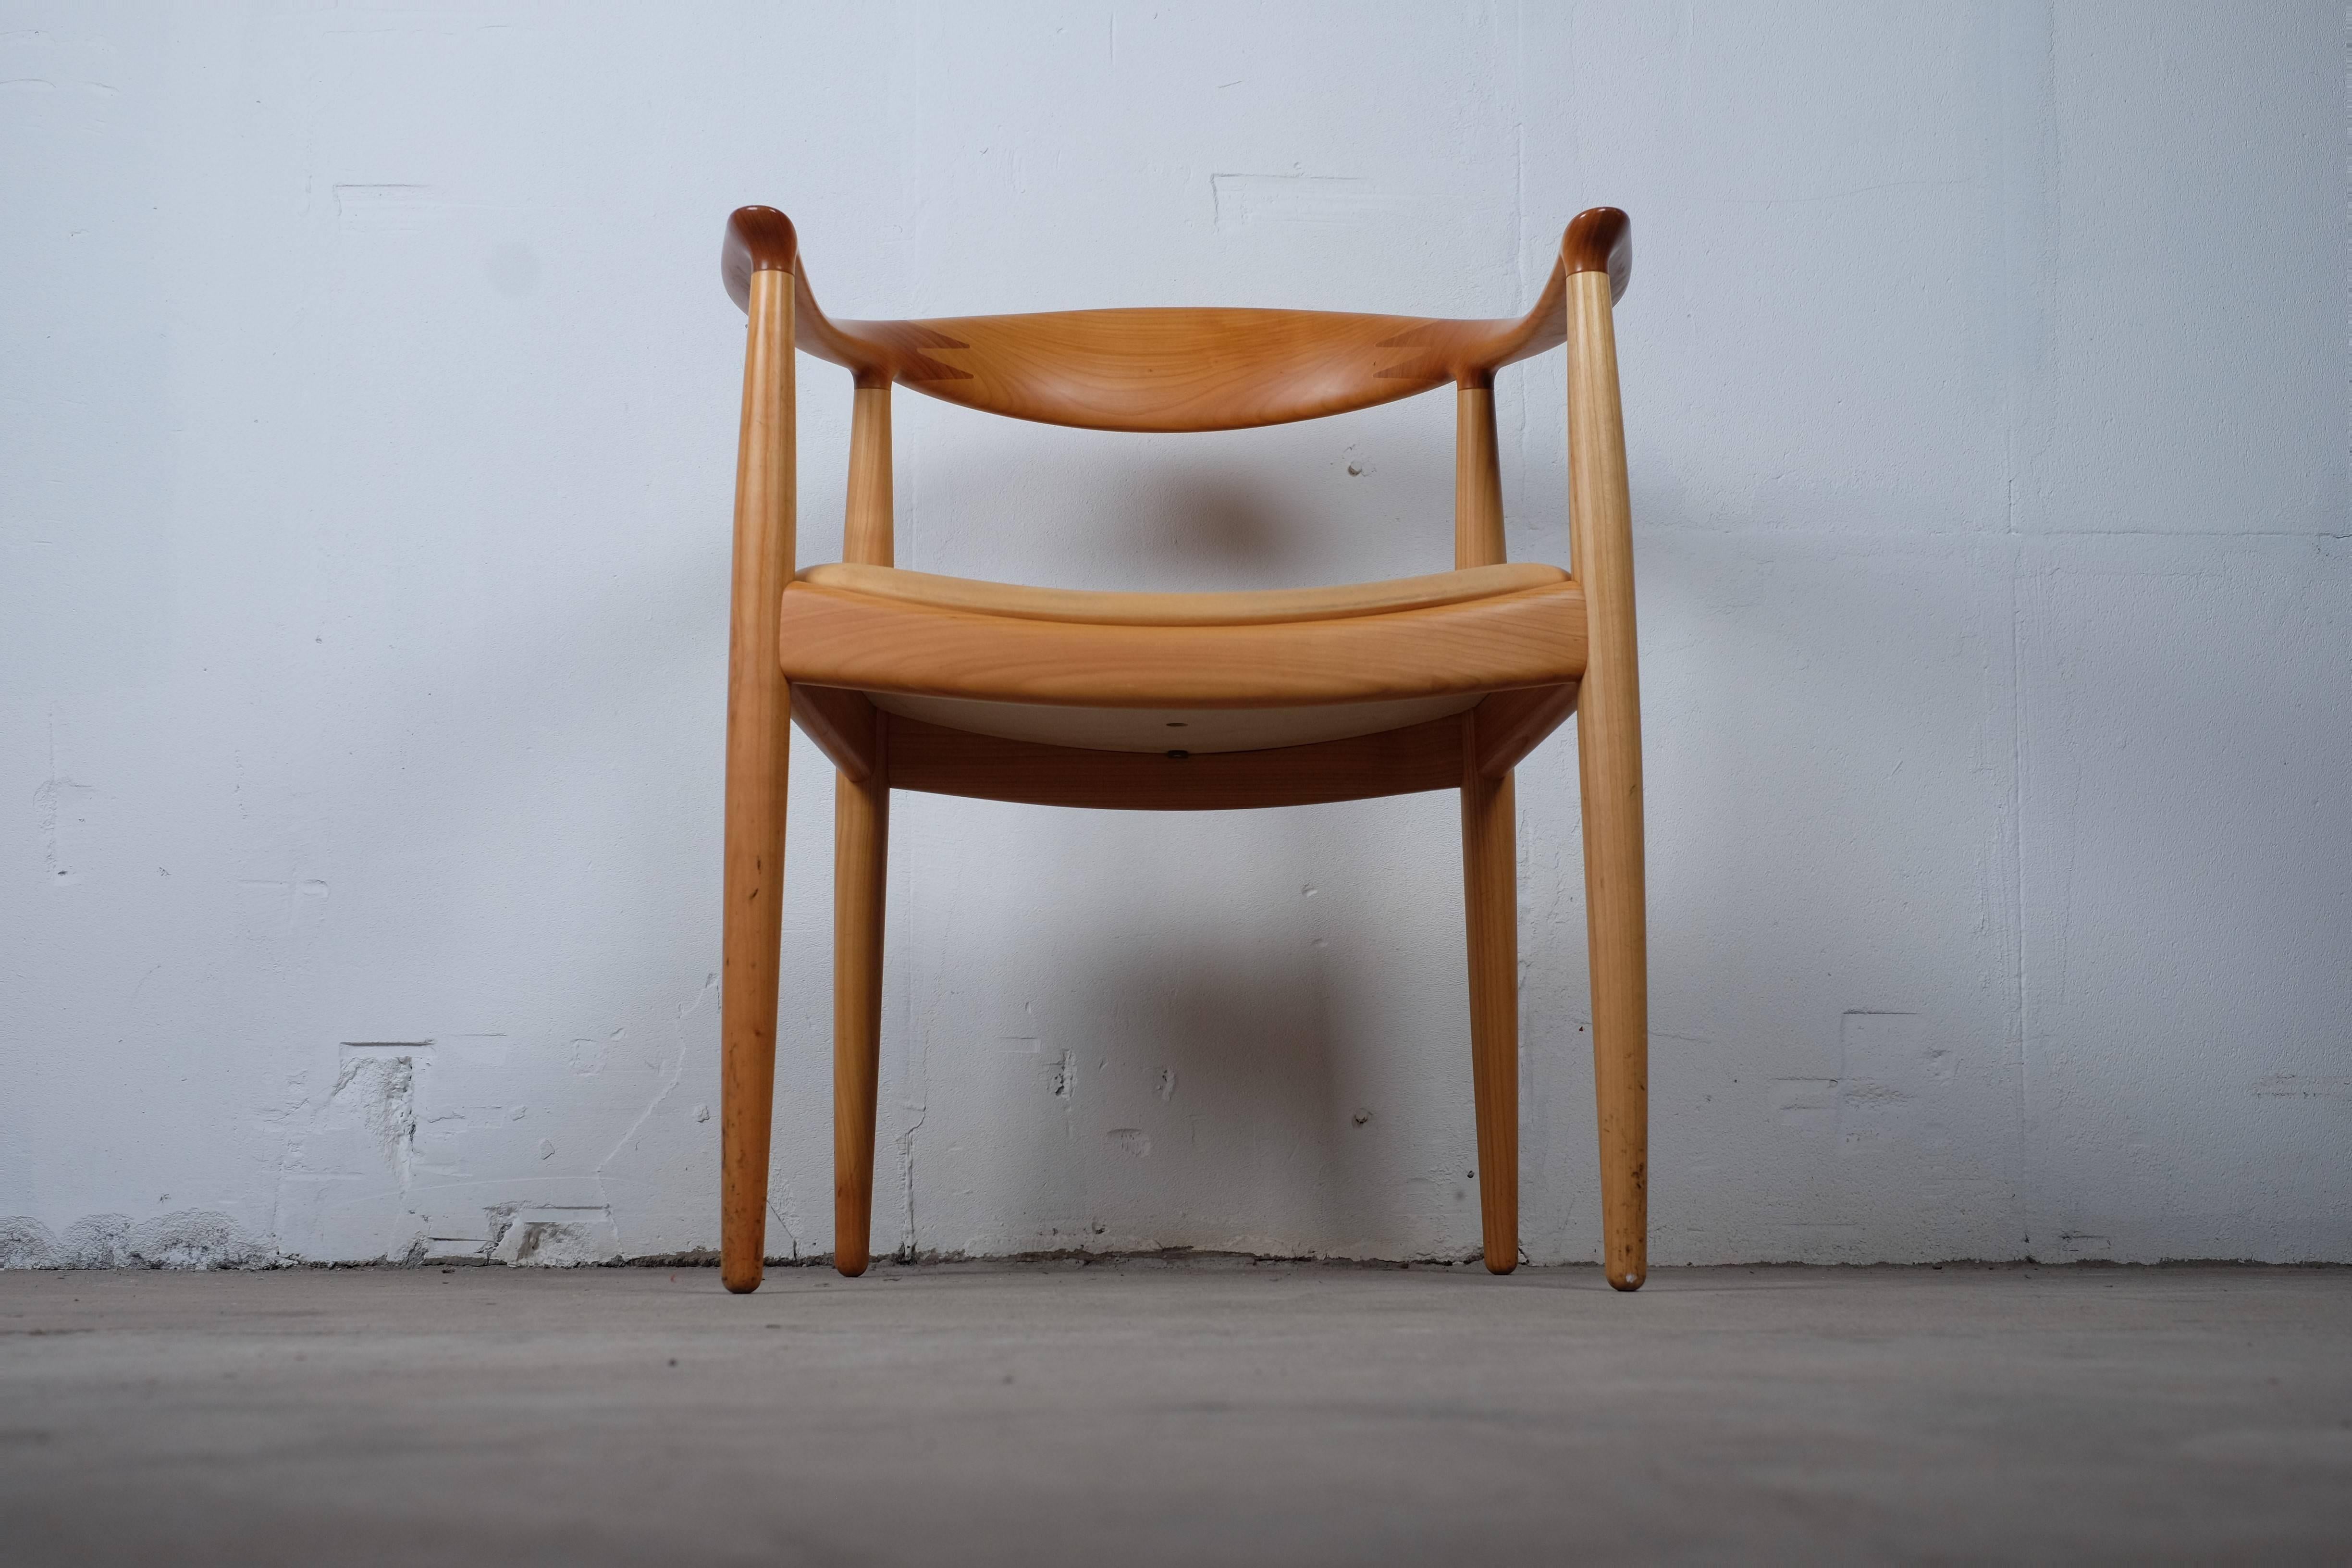 'The Round One' as Wegner referred to it with his usual Provincial modesty, is perhaps the most famous Danish piece of furniture of them all – which says a bit. Already a year after the production of this chair startet at Johannes Hansen